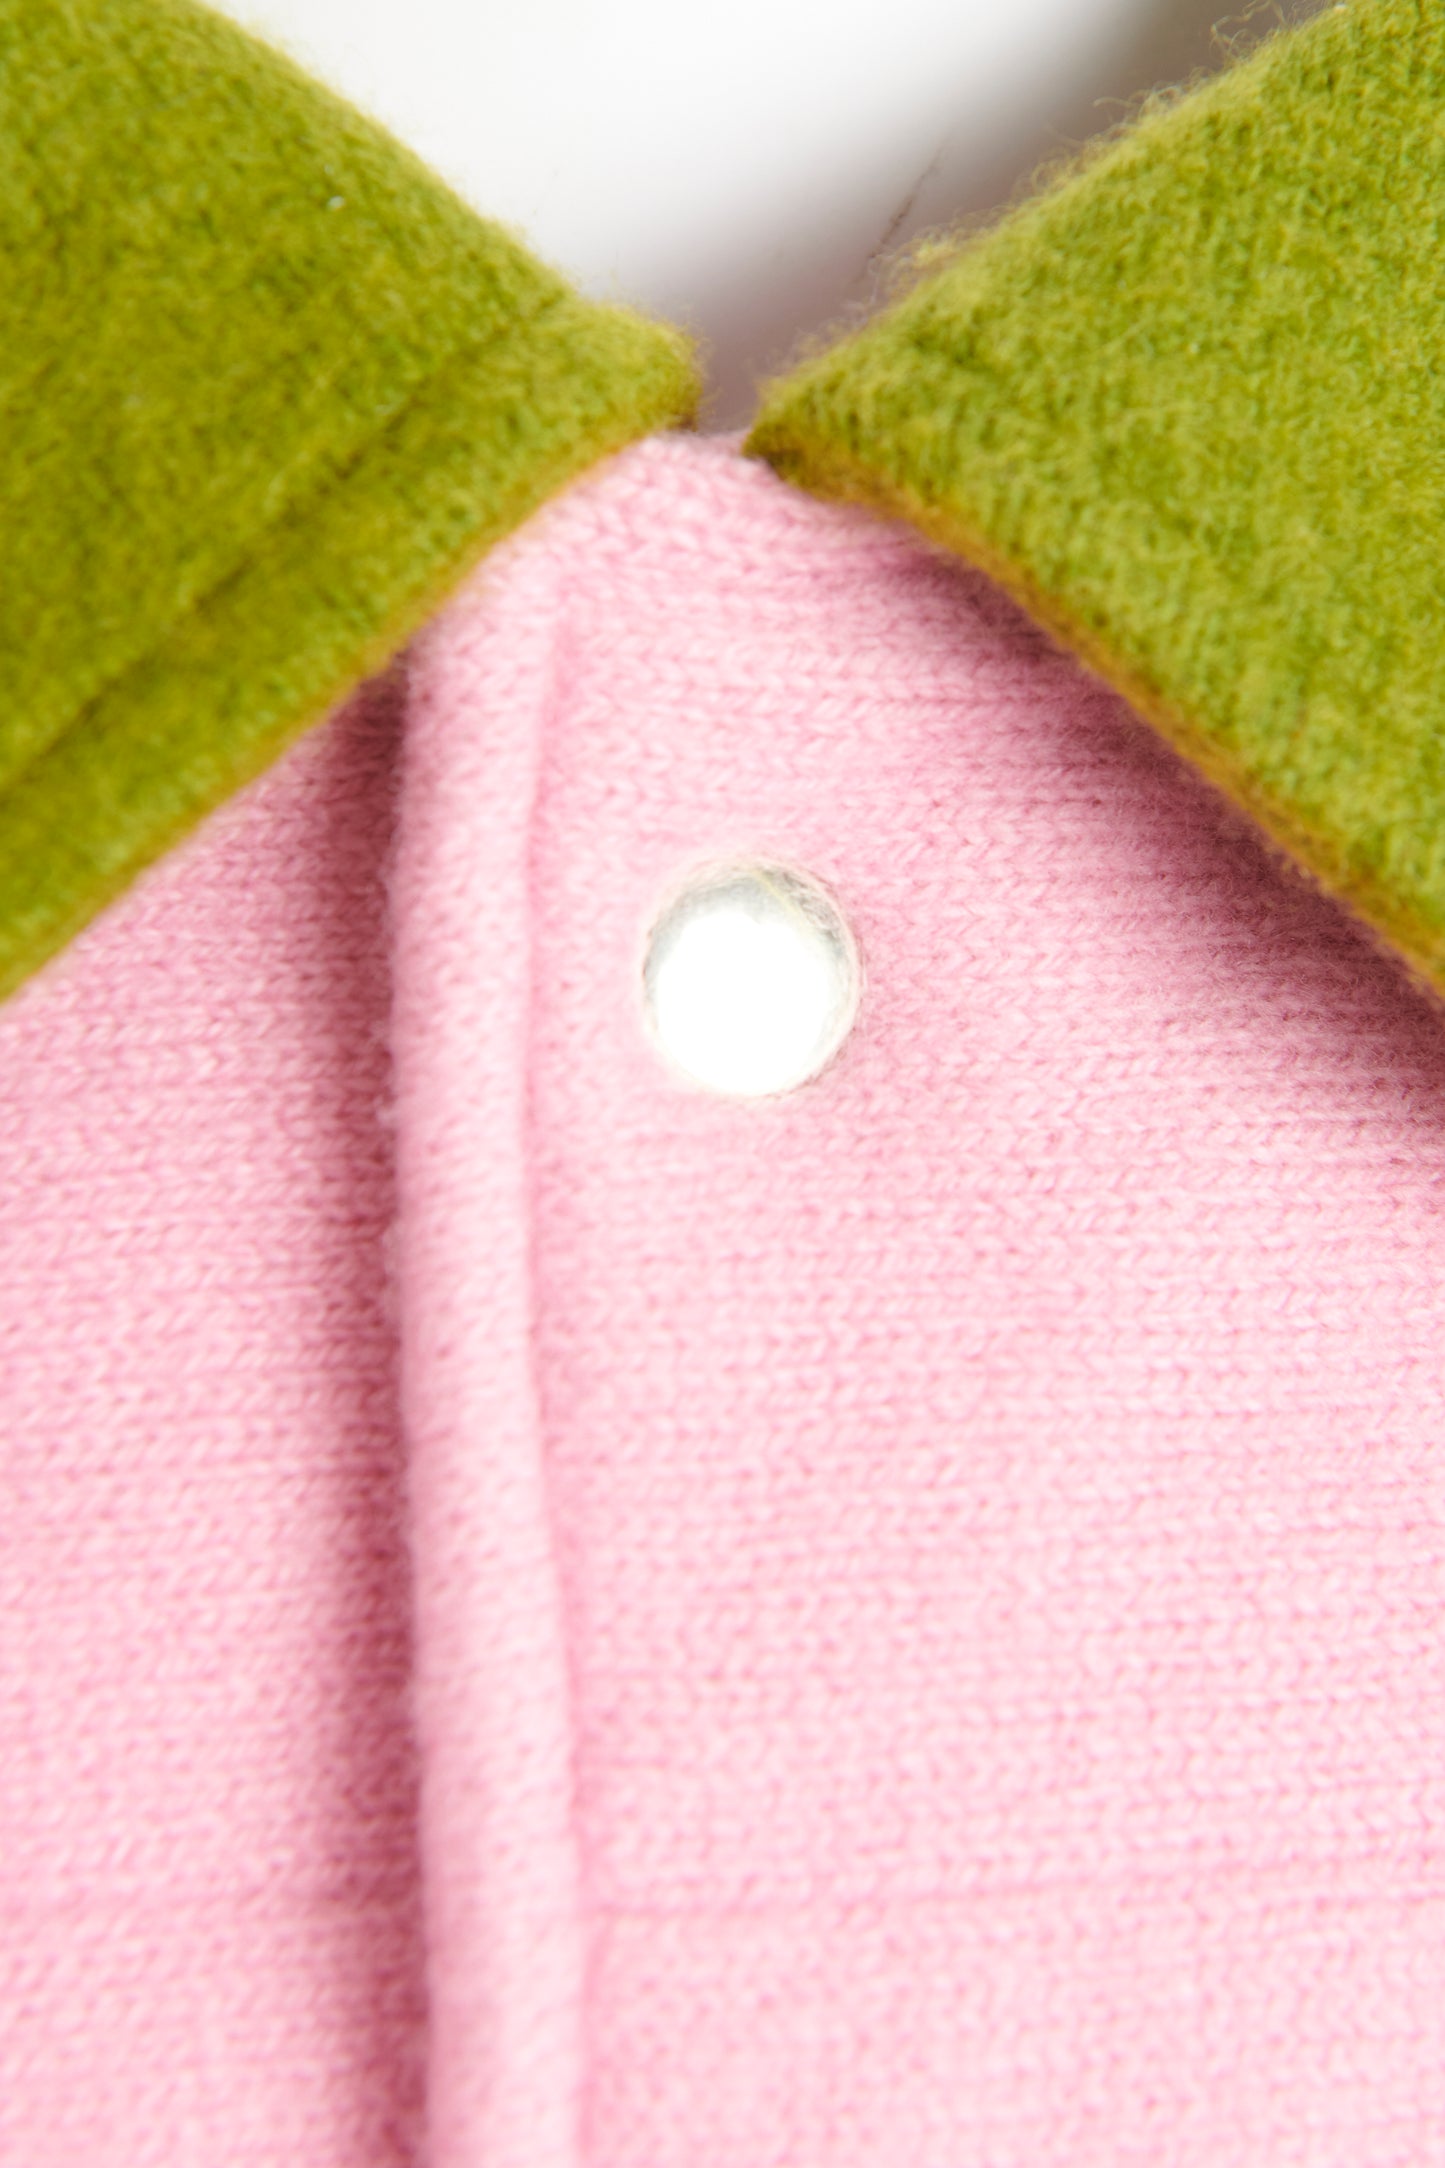 Pink Wool Blend Preowned Jacket With Green Collar